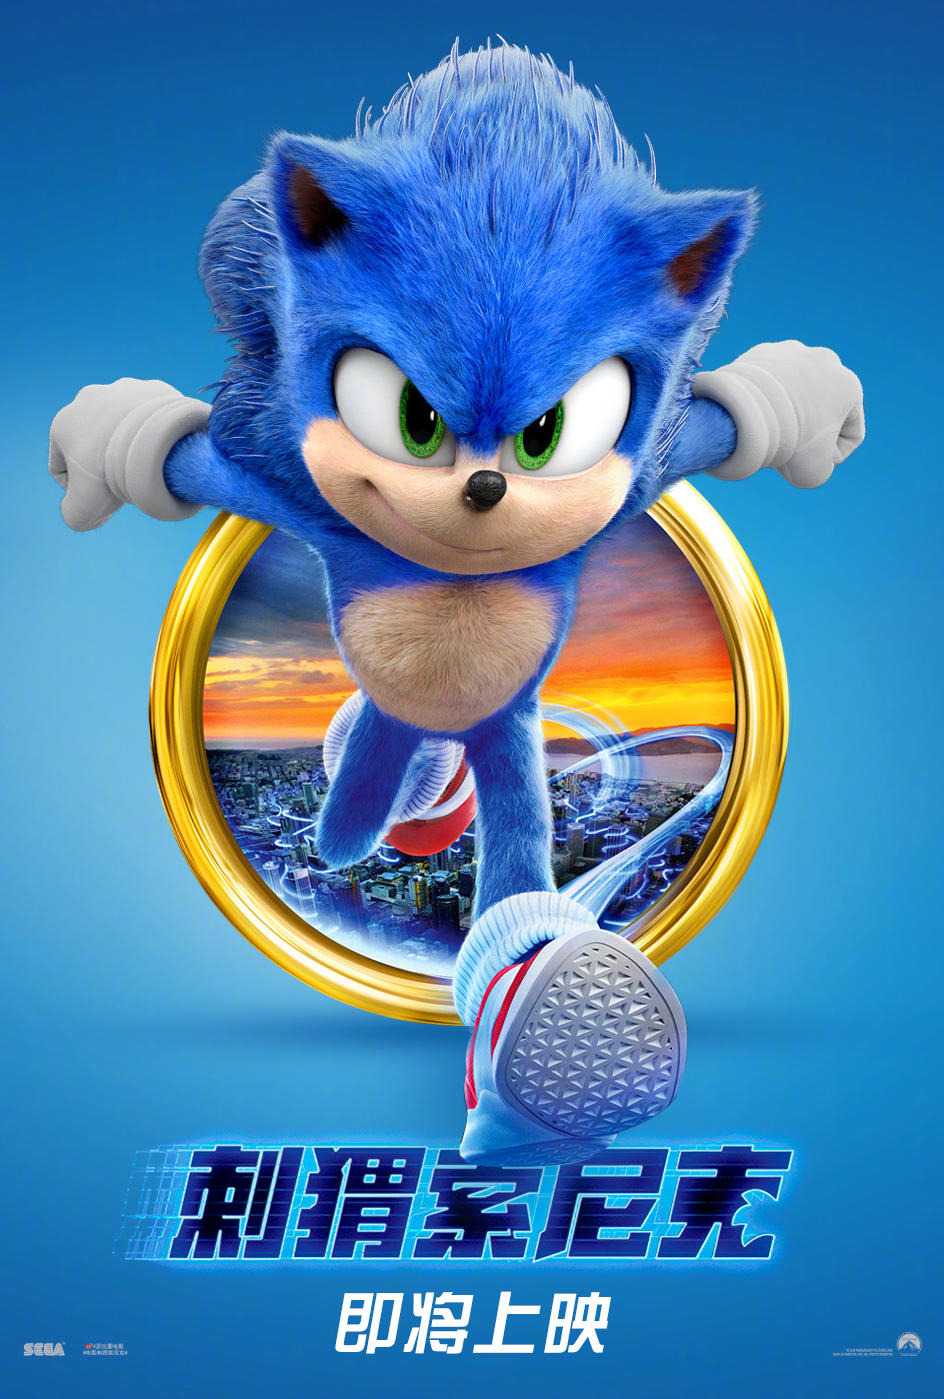 Extra Large Movie Poster Image for Sonic the Hedgehog (#16 of 28)